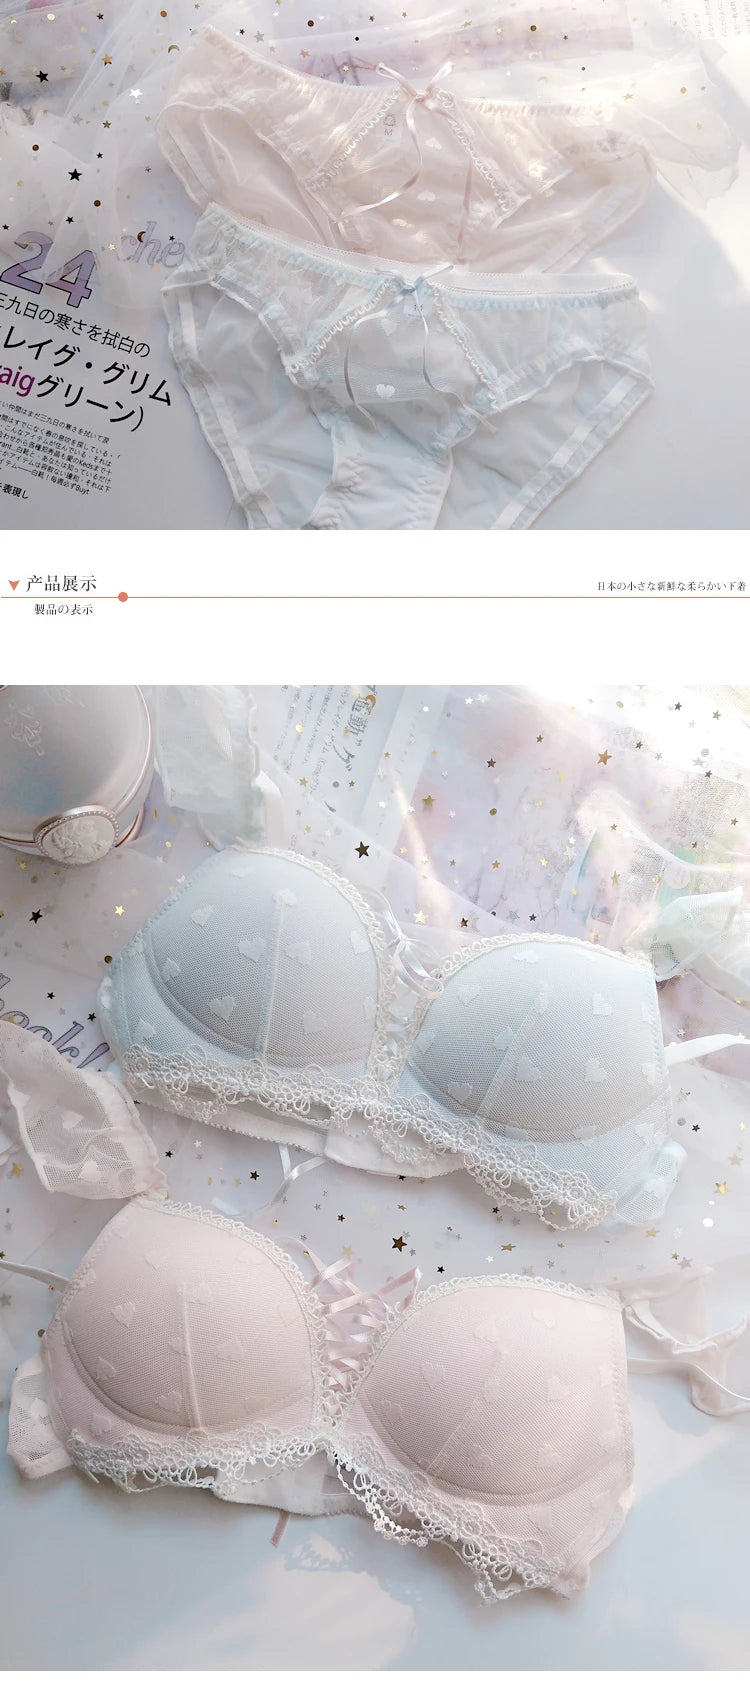 Harajuku Kawaii Fashion Japanese Heart Lace Lingerie Set - Kawaii Stop - Aesthetic, Confidence, Cute, Hair Accessory, Harajuku Fashion, Heart Embroidery, Kawaii, Lingerie Set, Lolita Style, Love Dot Pattern, Low-Waisted Briefs, Polyester, Push-Up Bra, Romance, Spandex, Special Occasions, Sweet, Unlined, Wire-Free, Women's Underwear